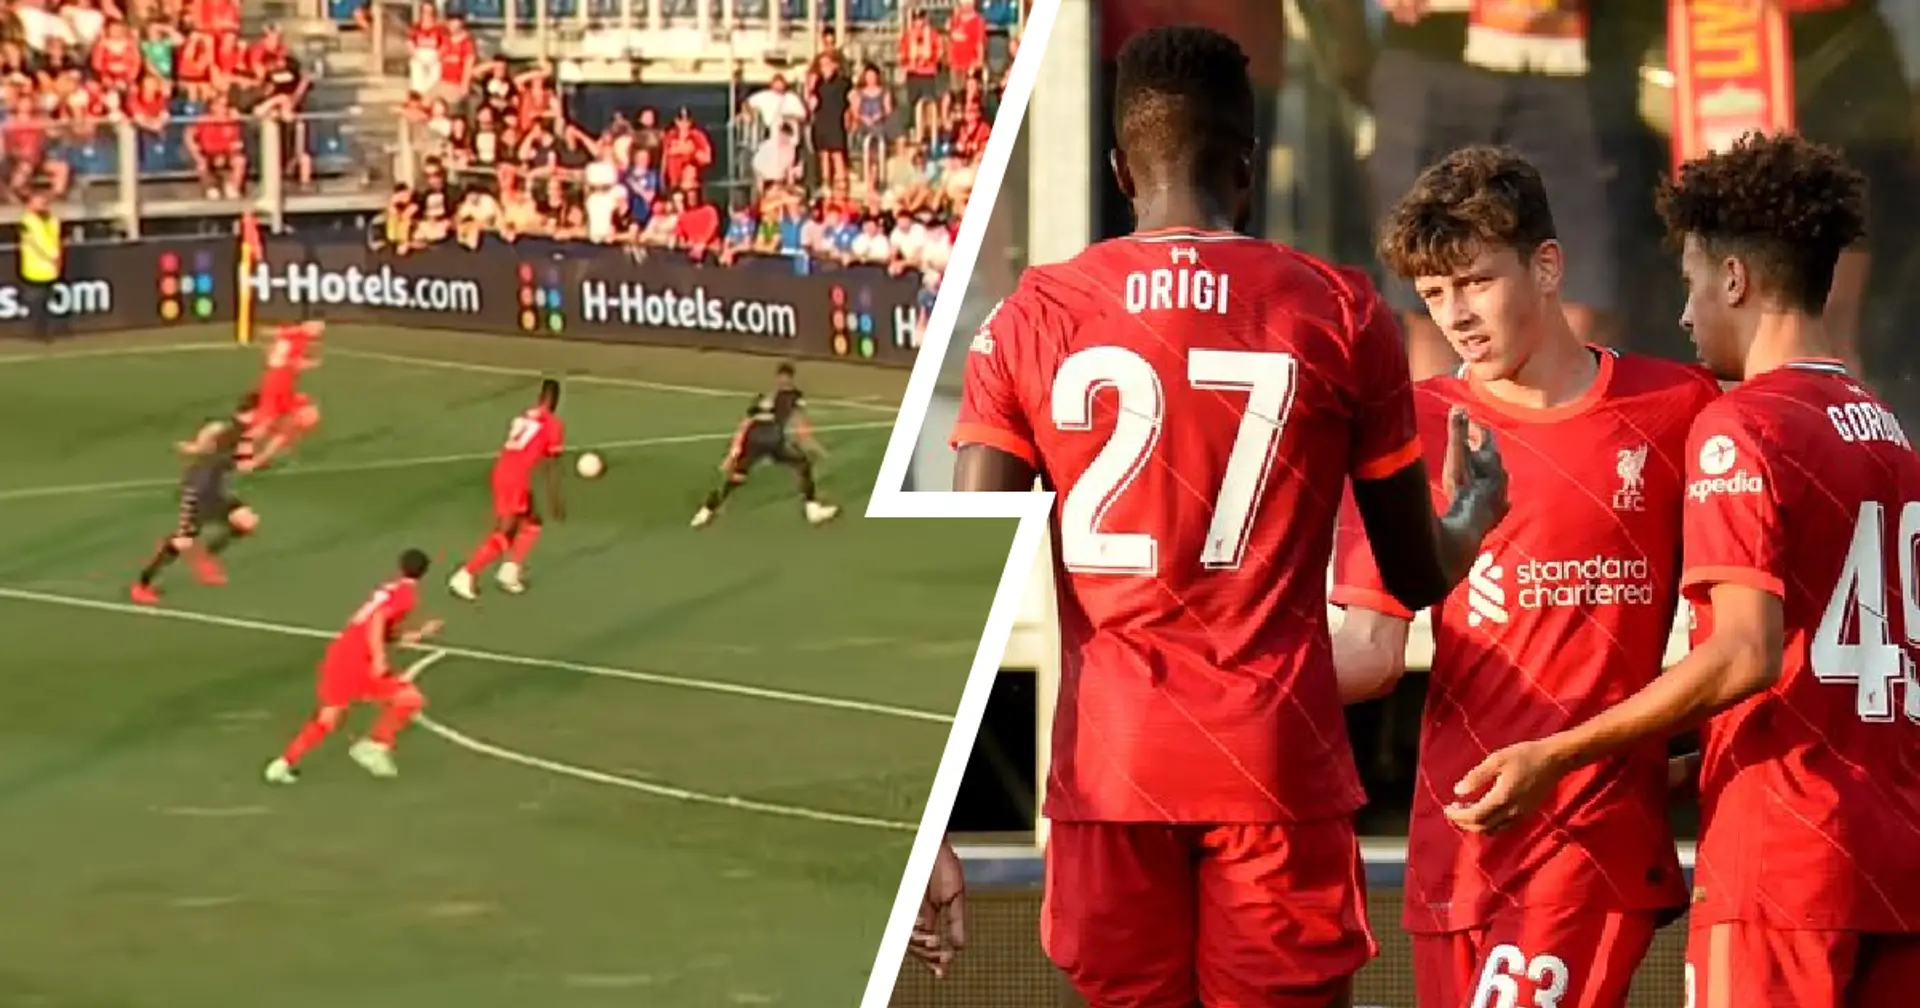 Job done: Highlights from Liverpool's 1-0 win over FSV Mainz (video)